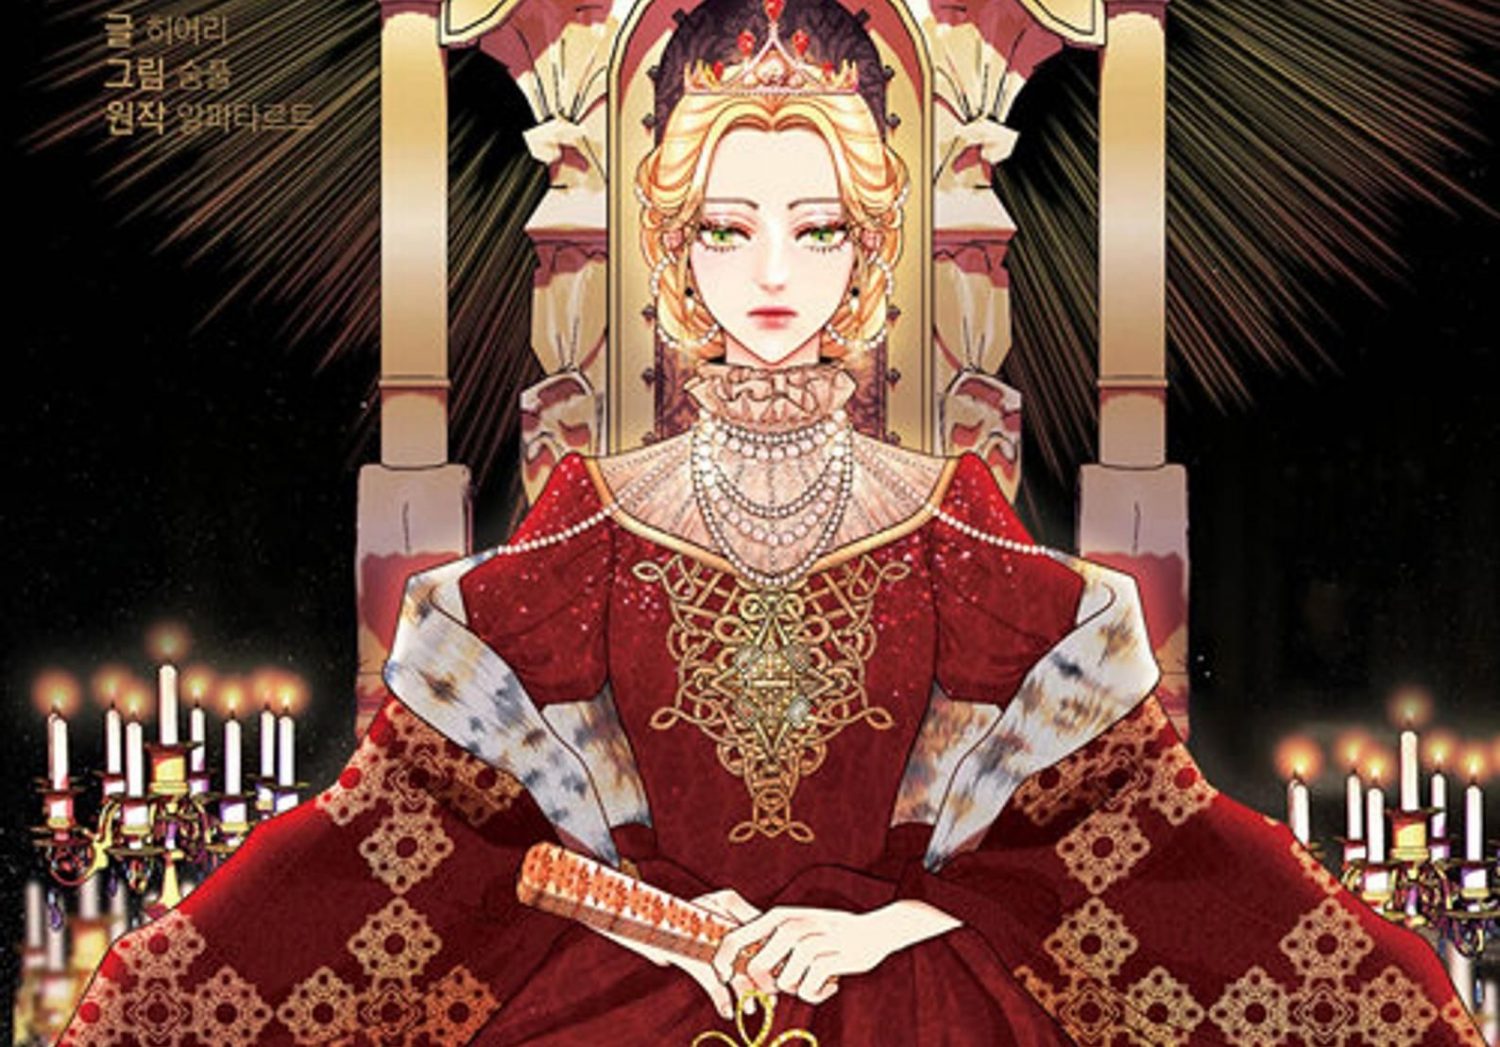 Remarried Empress Scaled